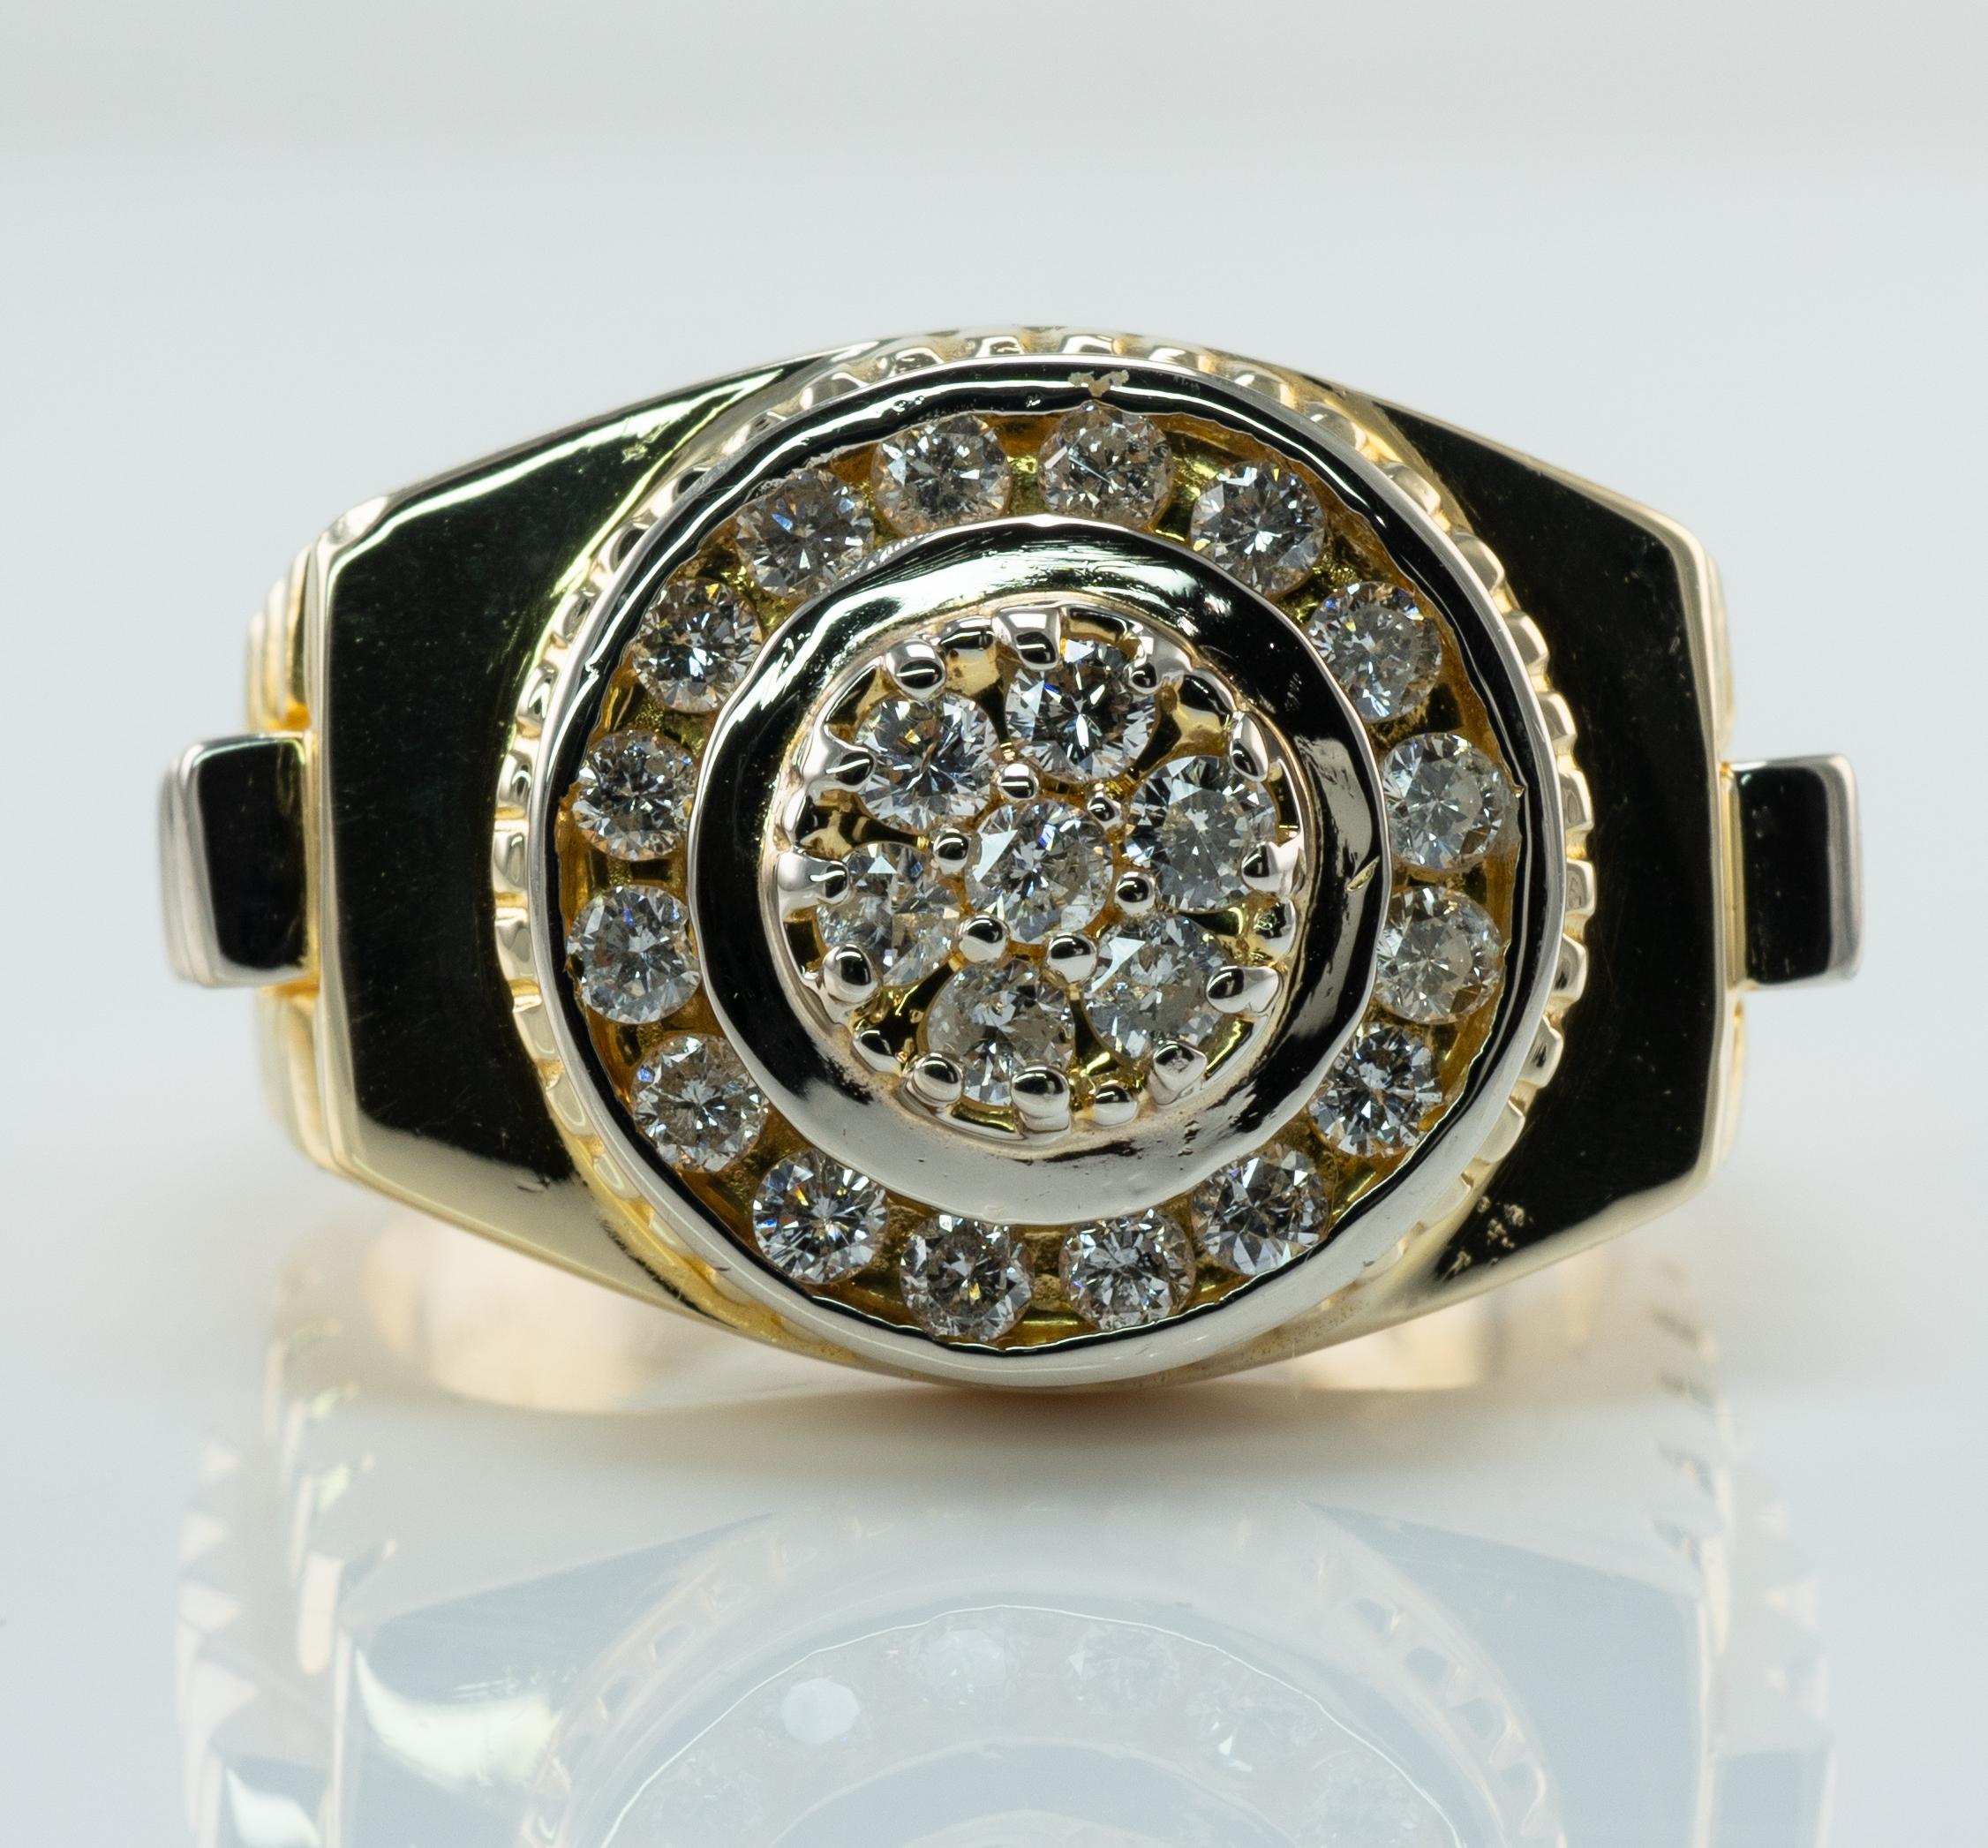 Mens Diamond Ring 14K Gold Band 1.15 TDW Rolex Style

This amazing vintage ring for a gentleman is finely crafted in solid 14K Yellow Gold with White Gold accents and set with white and fiery round brilliant cut diamonds. 7 diamonds in the center